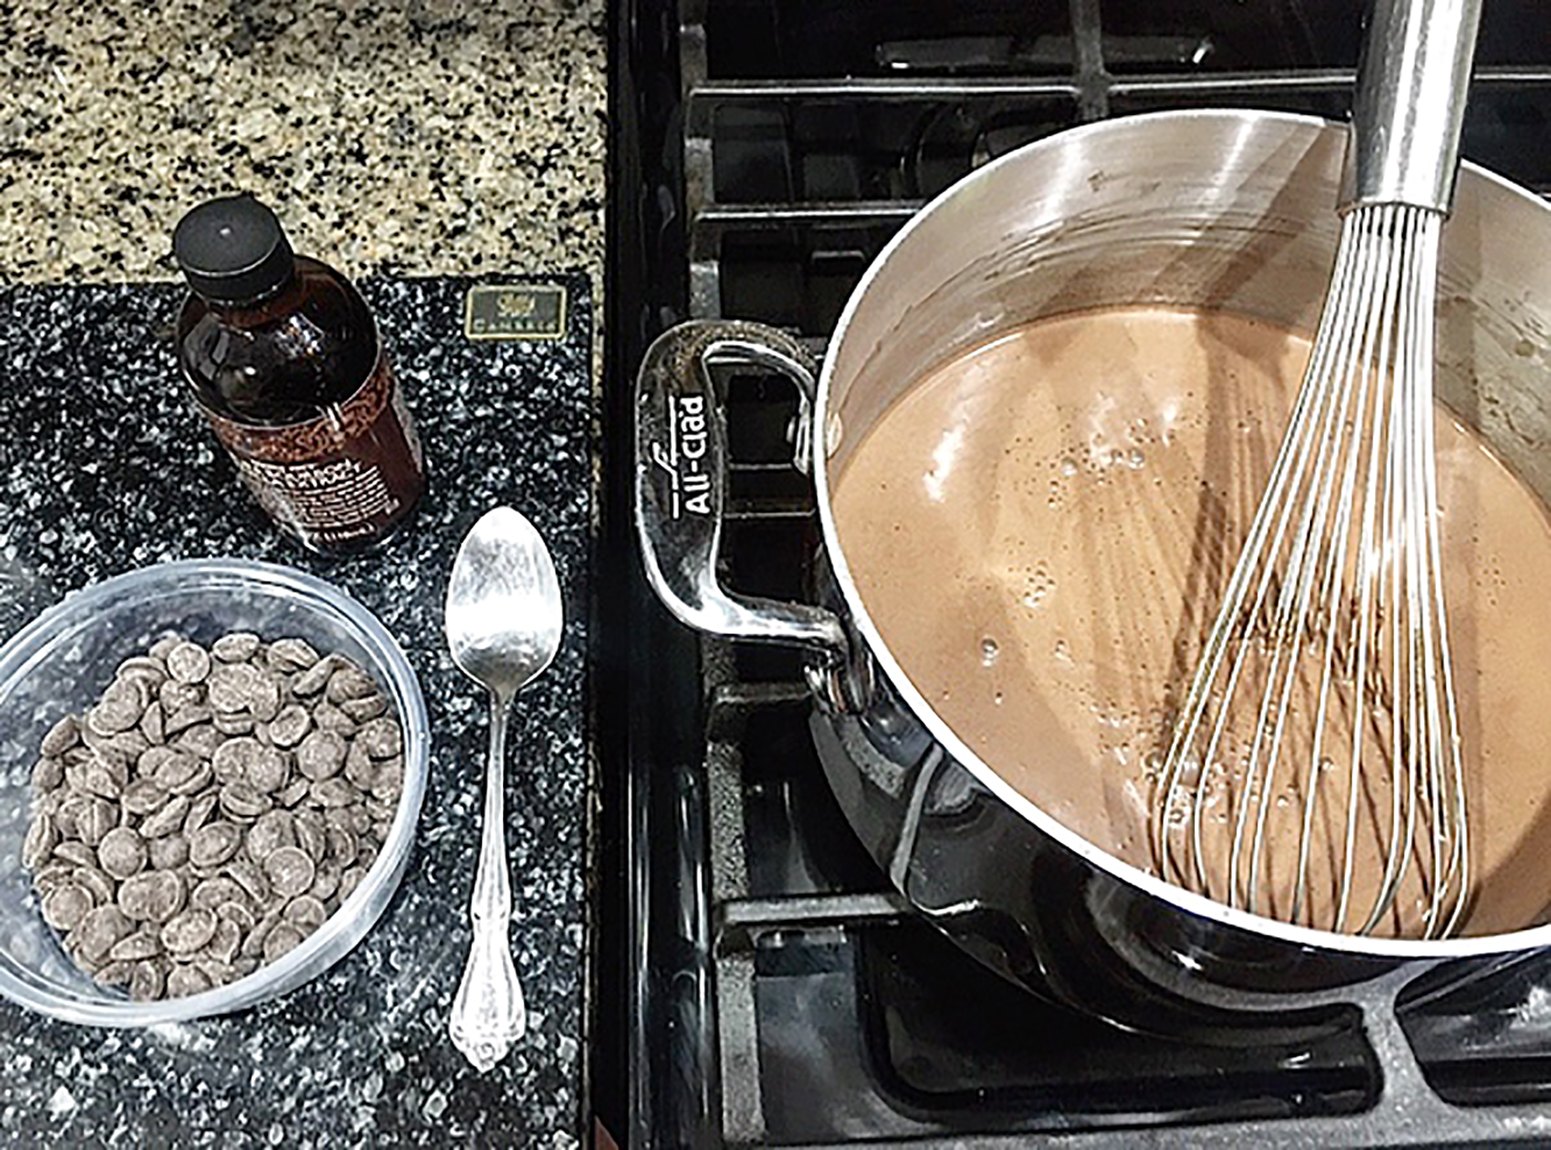 A photo of Summer Wright's process for making chocolate pudding from scratch. A metal bowl with chocolate pudding and a whisk sits on a stovetop, and a spoon, a bowl of chocolate chips, and a vanilla extract bottle sit on the counter beside it.